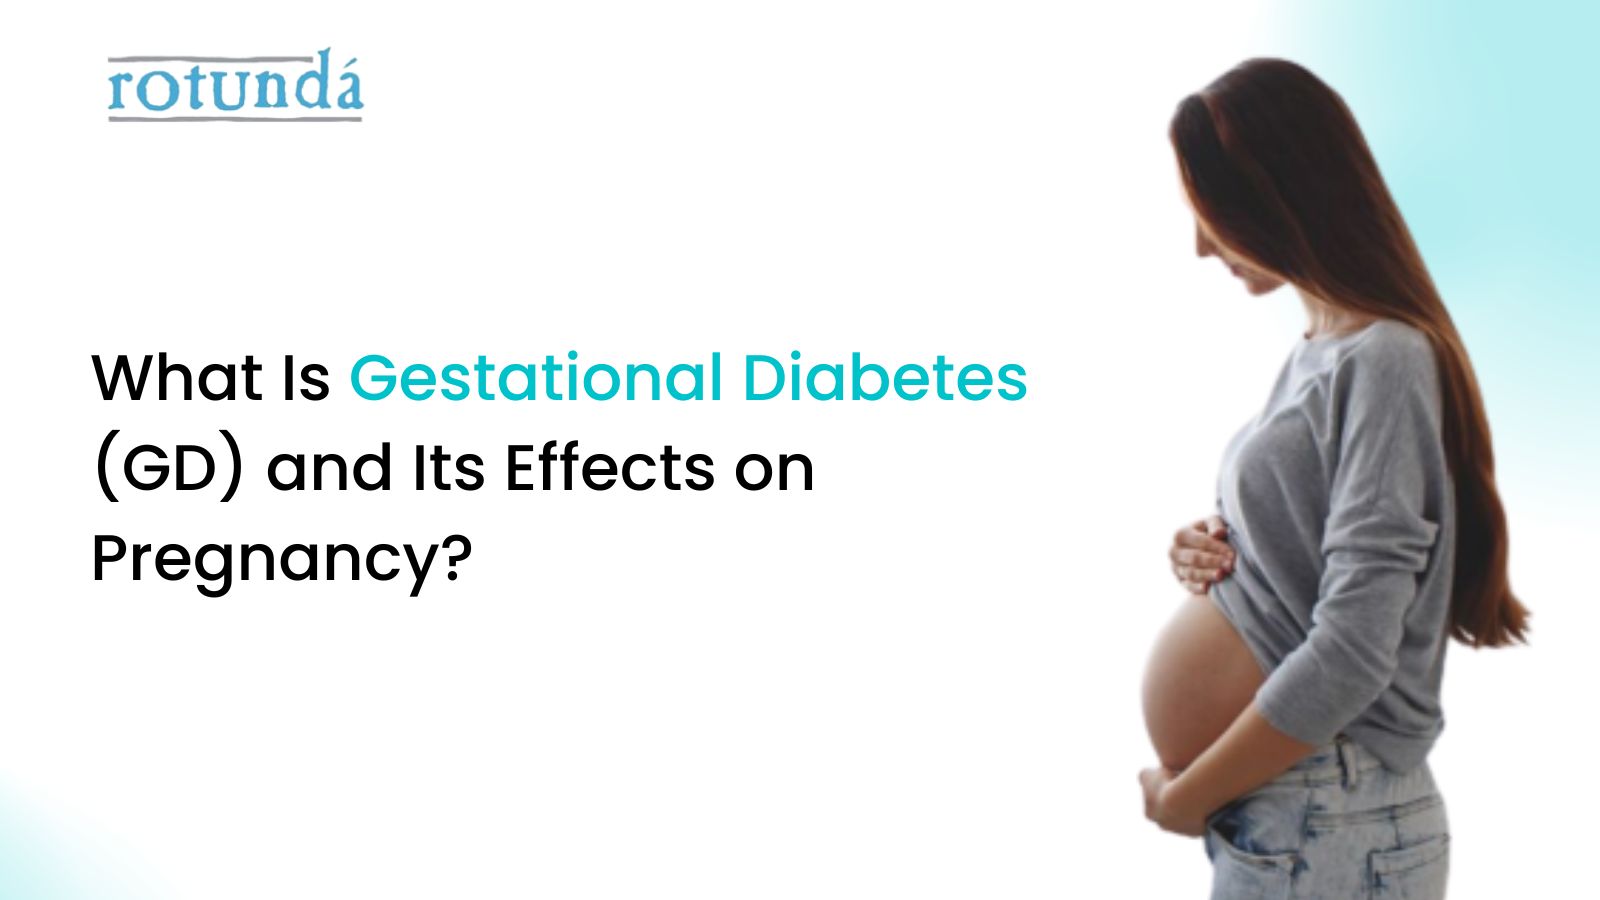 What Is Gestational Diabetes and Its Effects on Pregnancy?